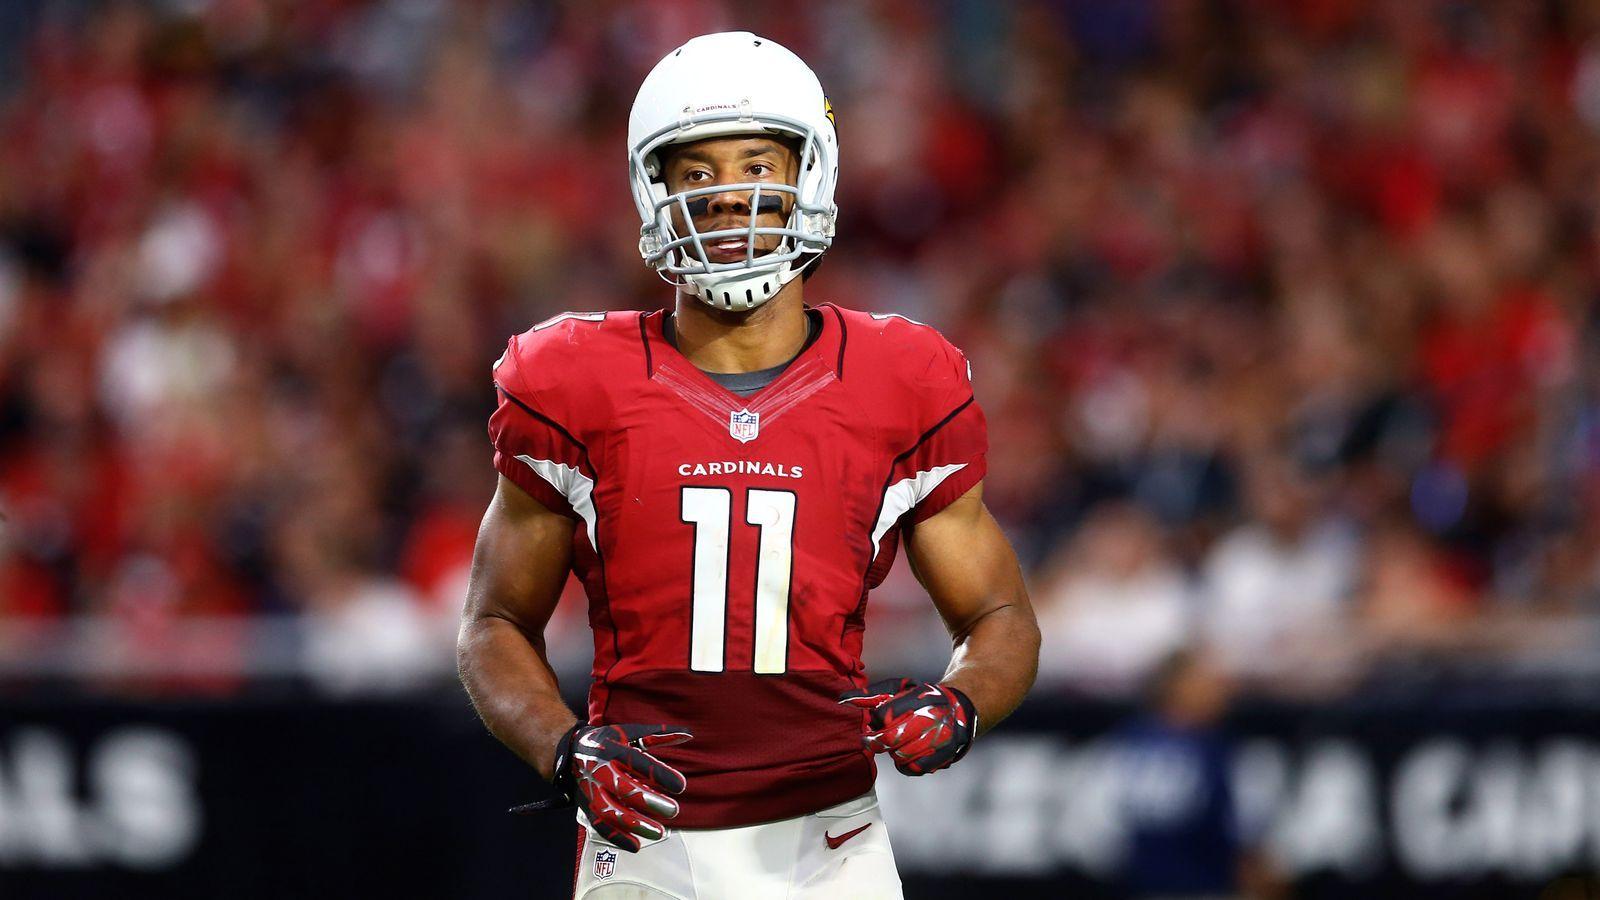 Larry Fitzgerald injury update: Cardinals WR questionable; fantasy